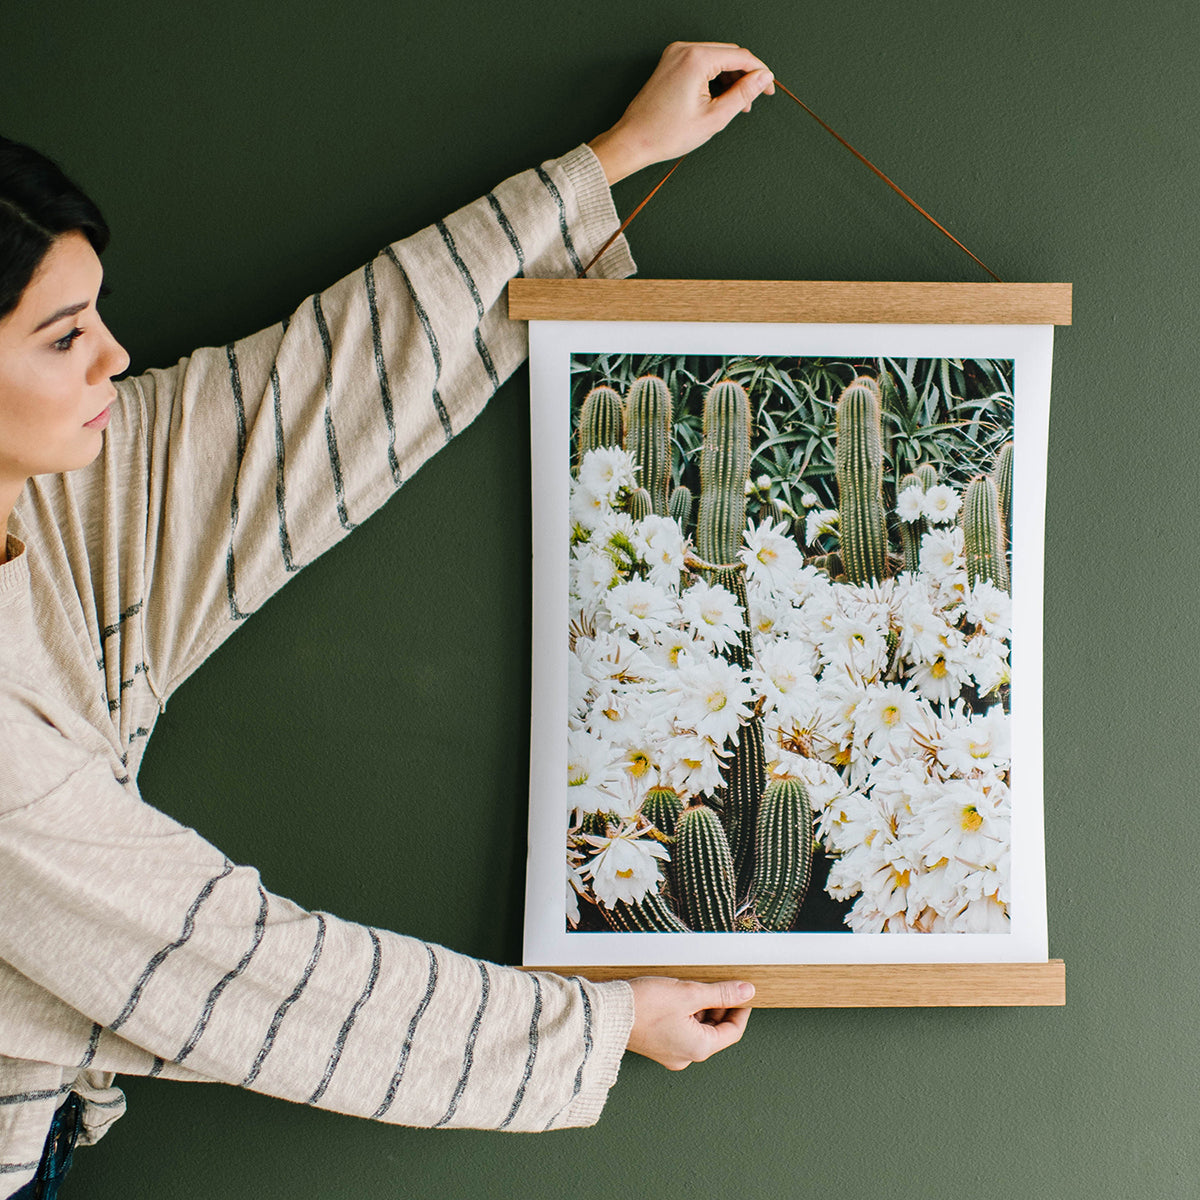 13 Great Ways to Update Picture Frames and Wall Art